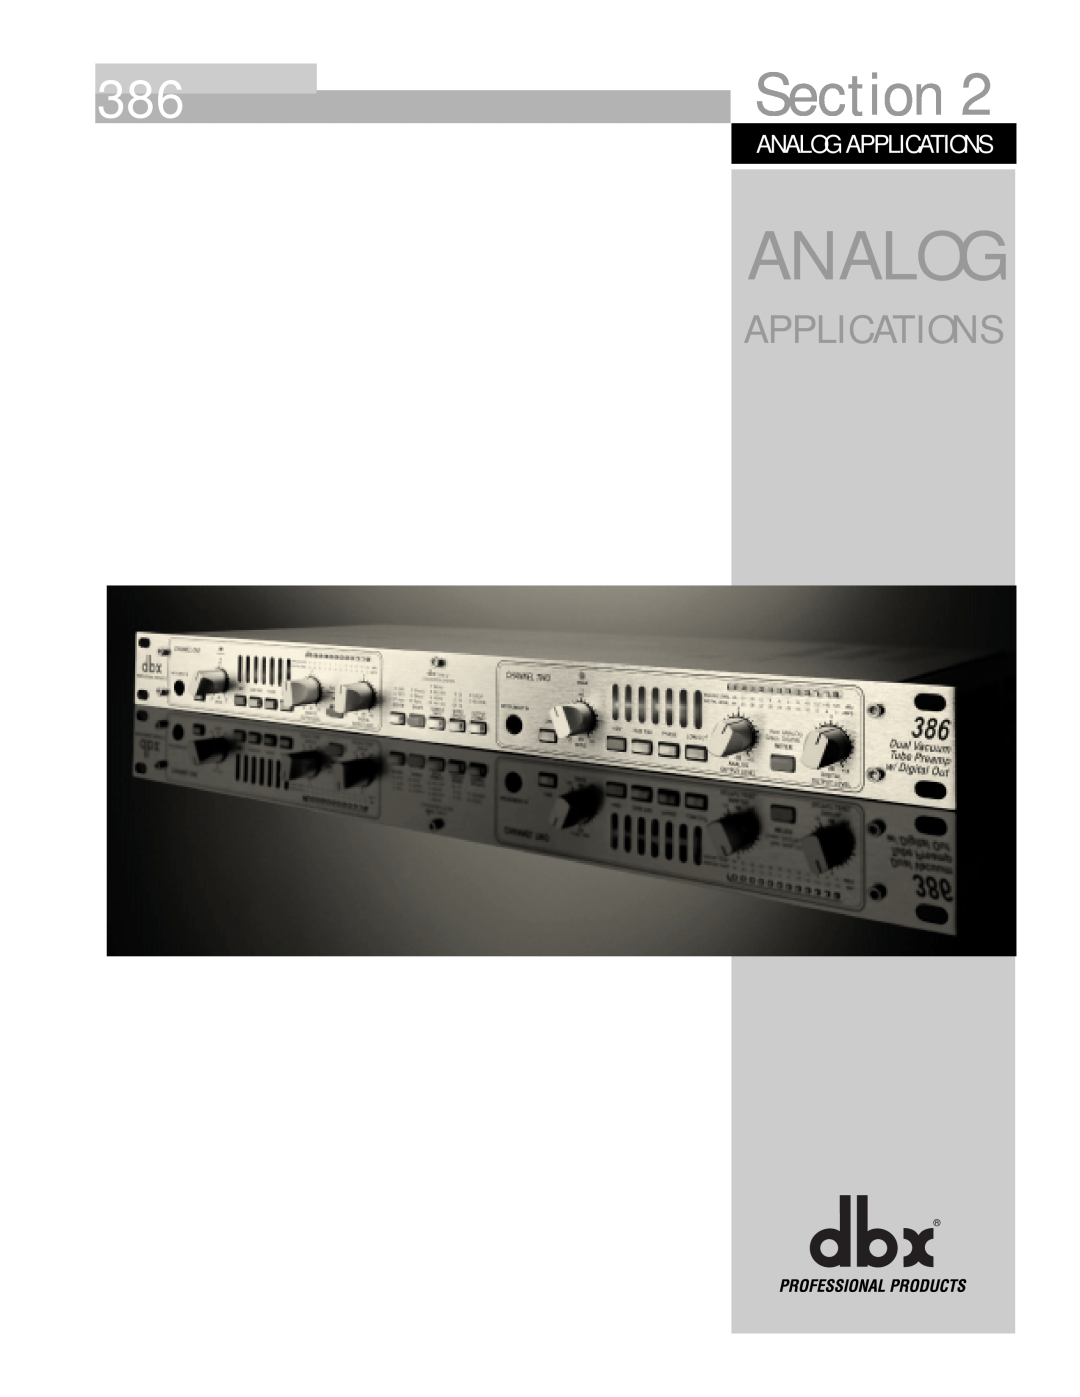 dbx Pro 386 user manual Analog Applications, Section 